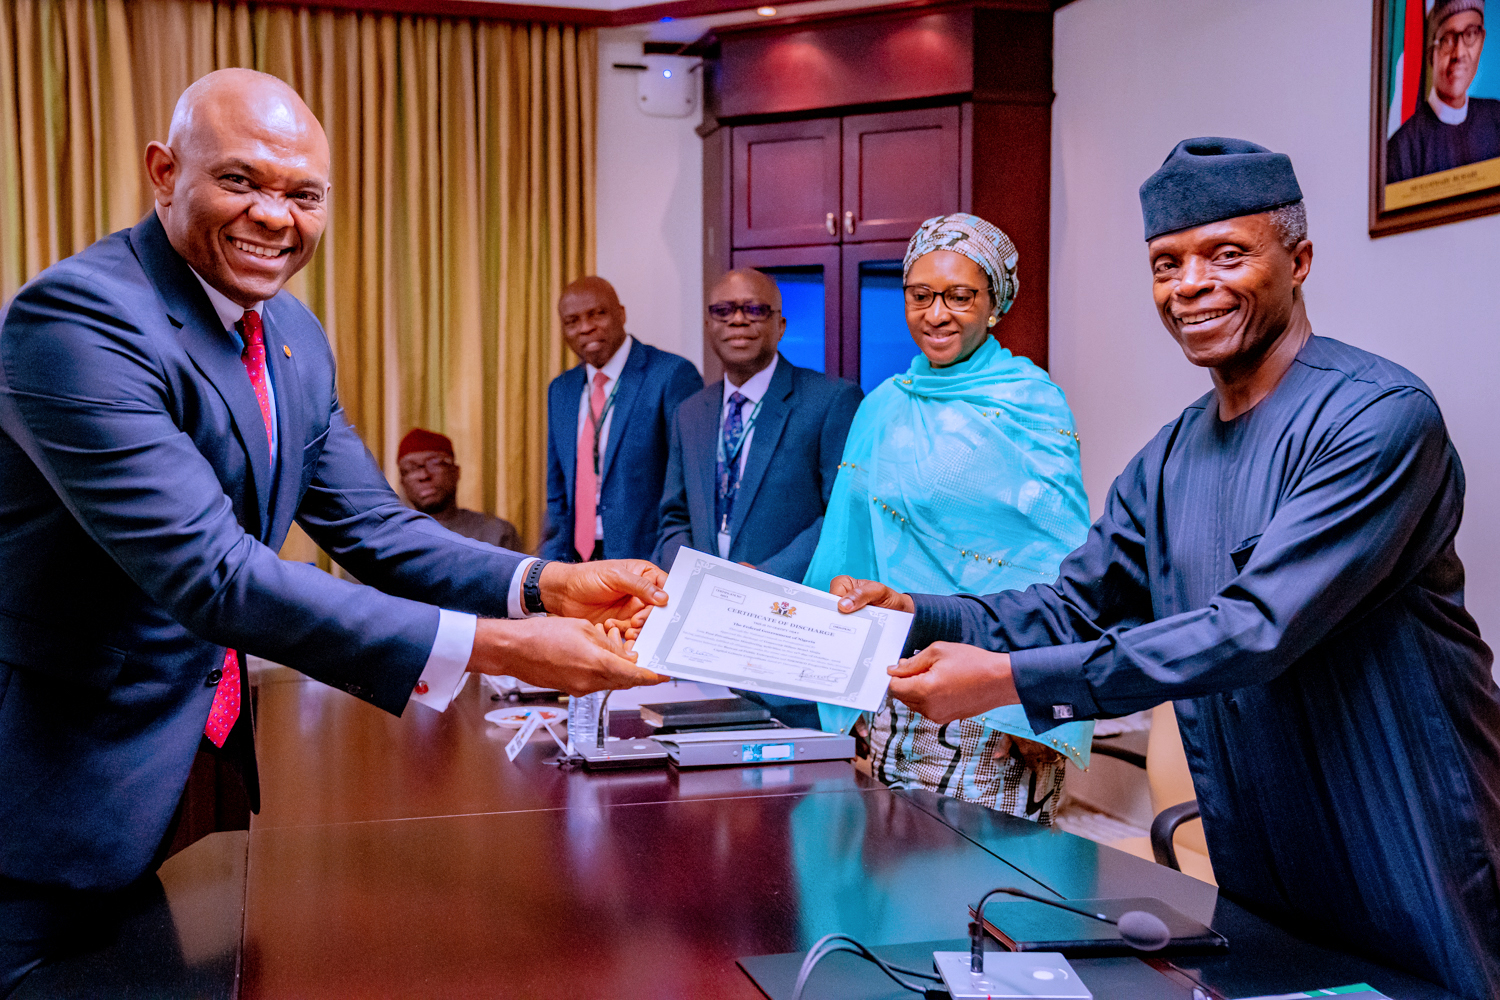 VP Osinbajo Chairs National Council On Privatization Meeting & Presents Certificate Of Discharge To Transcorp Hotels Chairman, Mr. Tony Elumelu On 14/10/2019